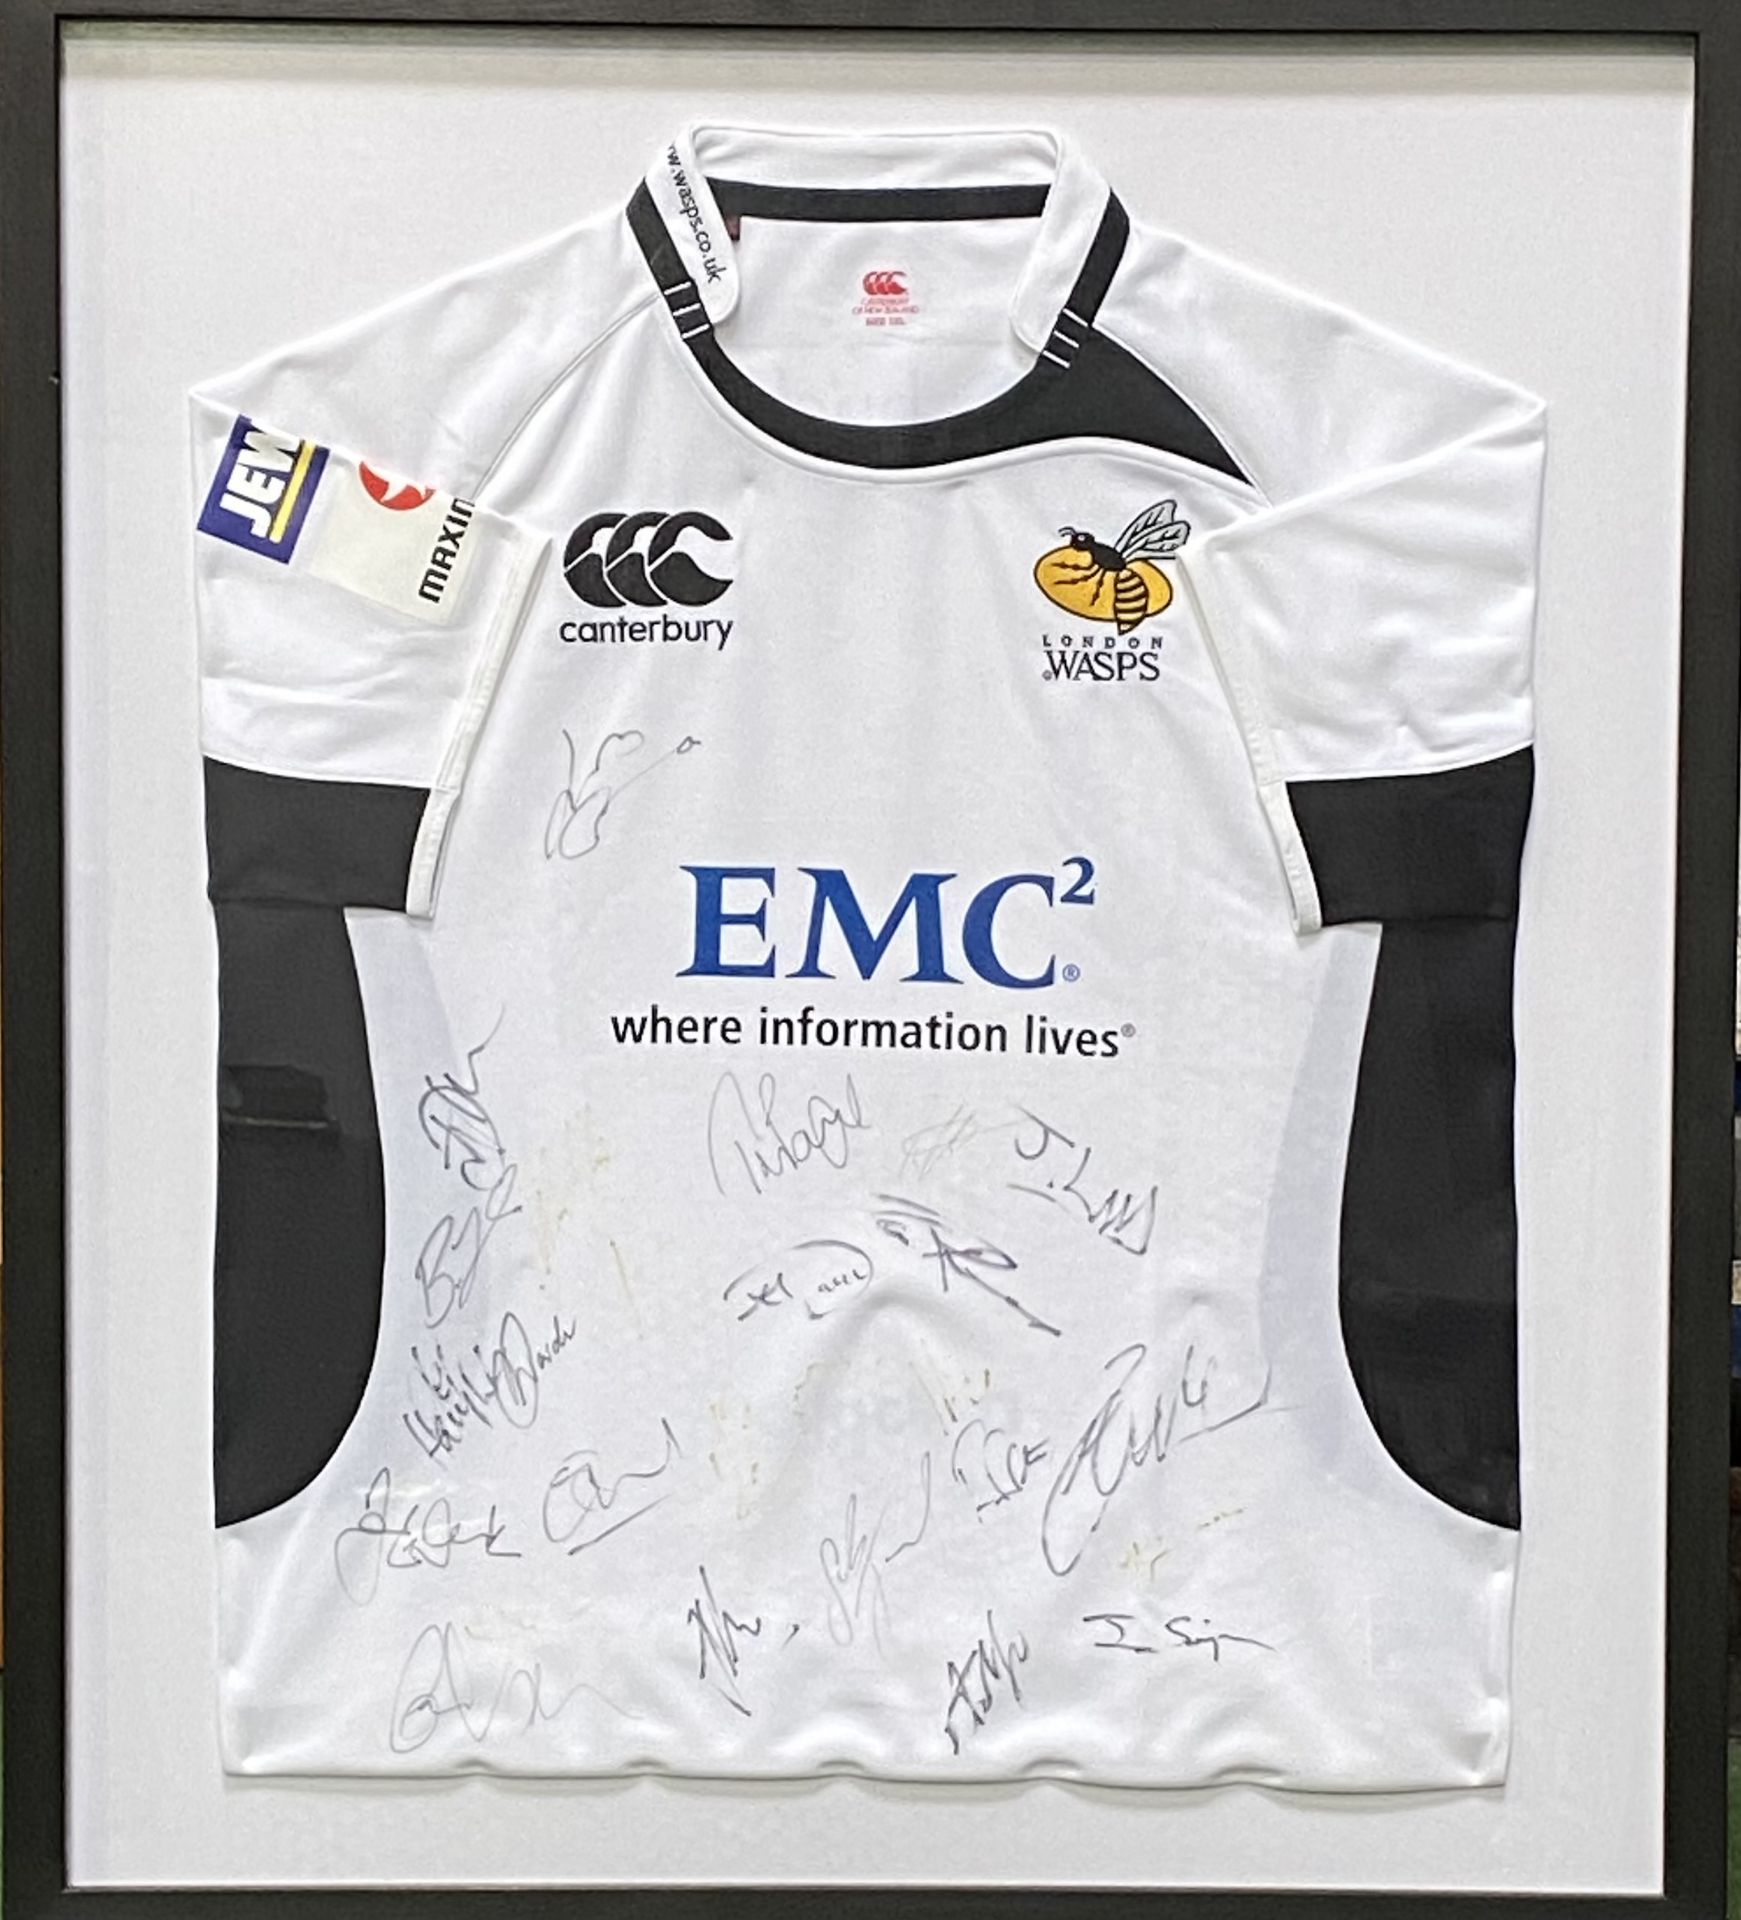 Framed and glazed London Wasps rugby shirt